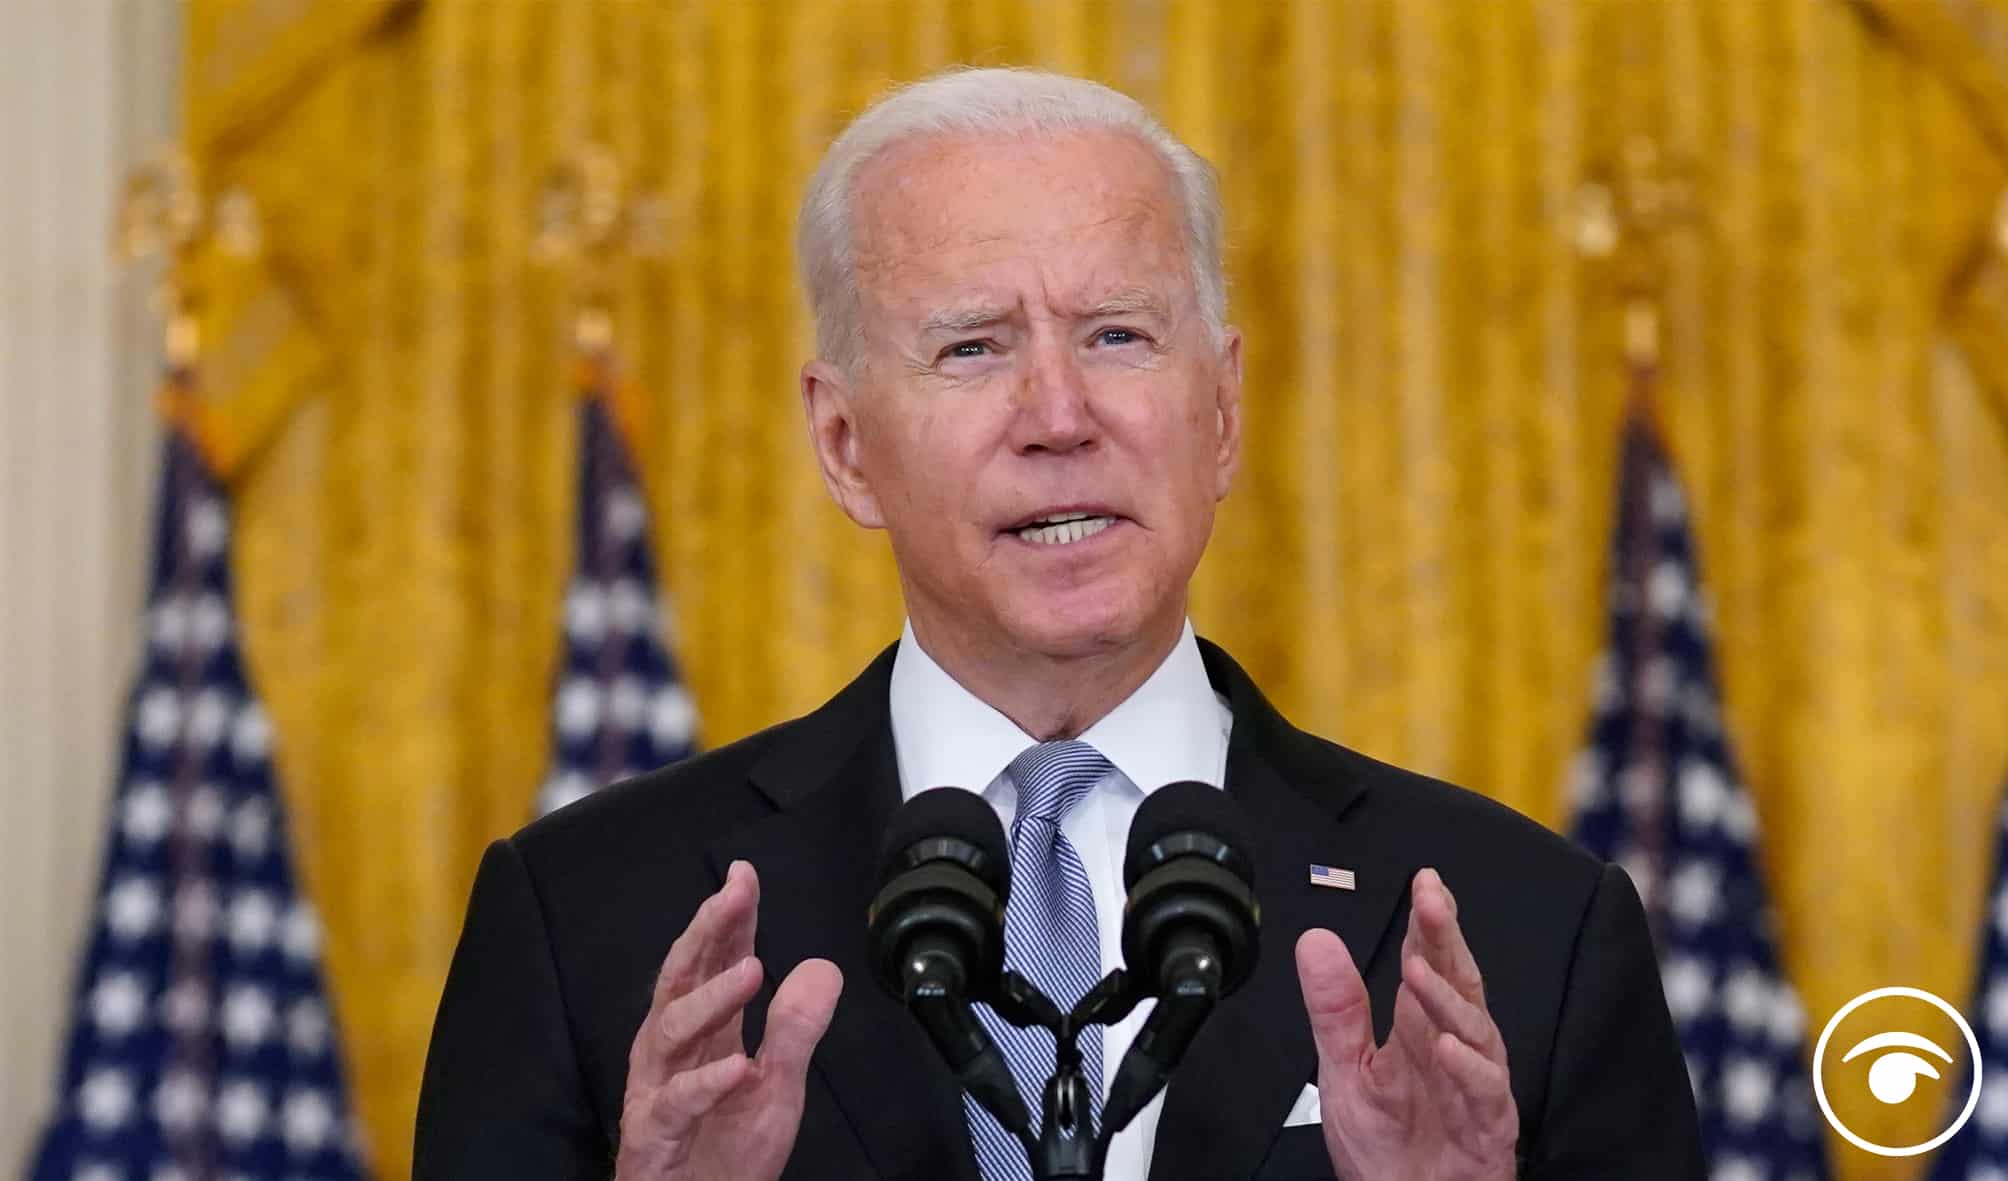 Elevenses: What Did You Expect From Joe Biden?